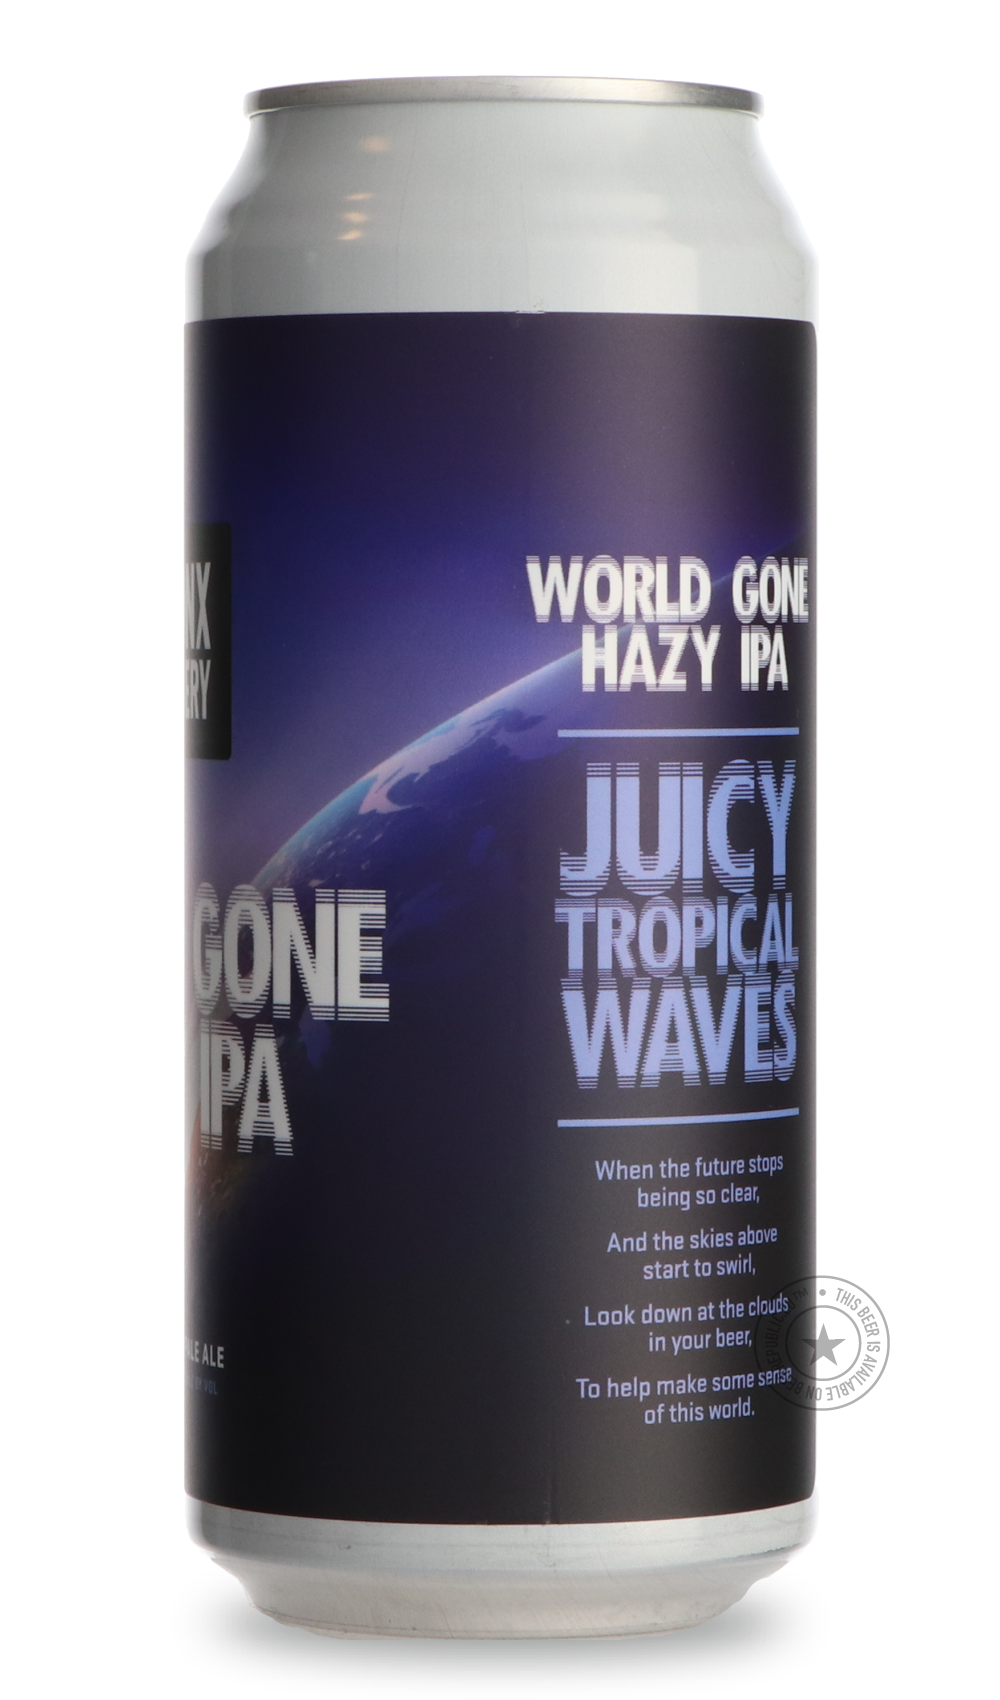 -Bronx- World Gone Hazy-IPA- Only @ Beer Republic - The best online beer store for American & Canadian craft beer - Buy beer online from the USA and Canada - Bier online kopen - Amerikaans bier kopen - Craft beer store - Craft beer kopen - Amerikanisch bier kaufen - Bier online kaufen - Acheter biere online - IPA - Stout - Porter - New England IPA - Hazy IPA - Imperial Stout - Barrel Aged - Barrel Aged Imperial Stout - Brown - Dark beer - Blond - Blonde - Pilsner - Lager - Wheat - Weizen - Amber - Barley Wi